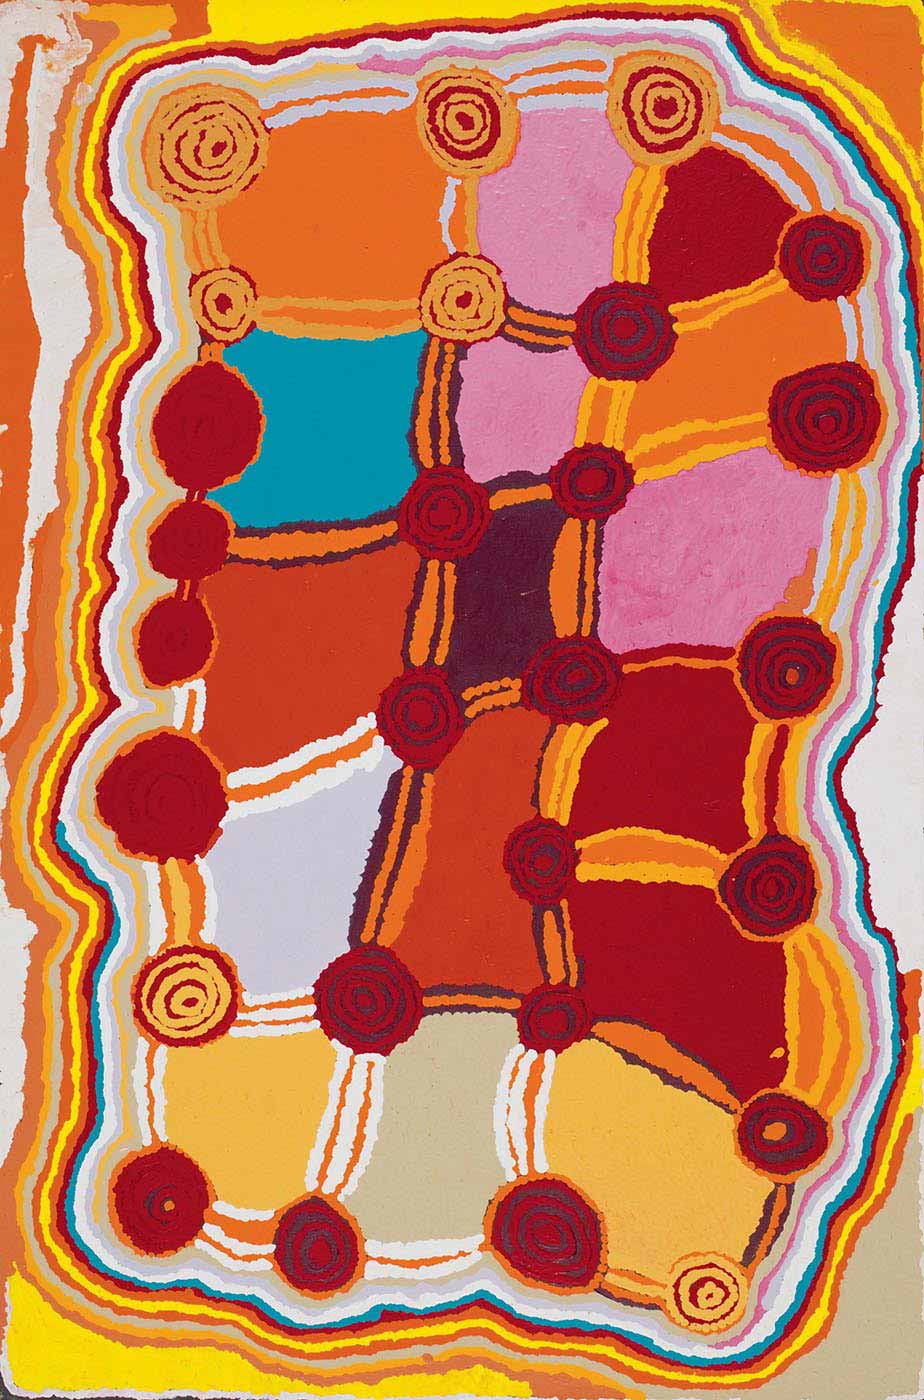 A painting on brown linen with one blue square of solid paint in the upper left corner. There is a grid of red concentric circles, some with beige, black or yellow rings, connected by orange, yellow, white, black or beige striped lines, and with textured solid colours filling the spaces between. The square-like spaces are orange, pink, red, blue, black, brown, lavender, cream and pale green. Around the edge is a border in aqua, red, orange, yellow and beige with the top right and bottom left corners filled with solid colour.